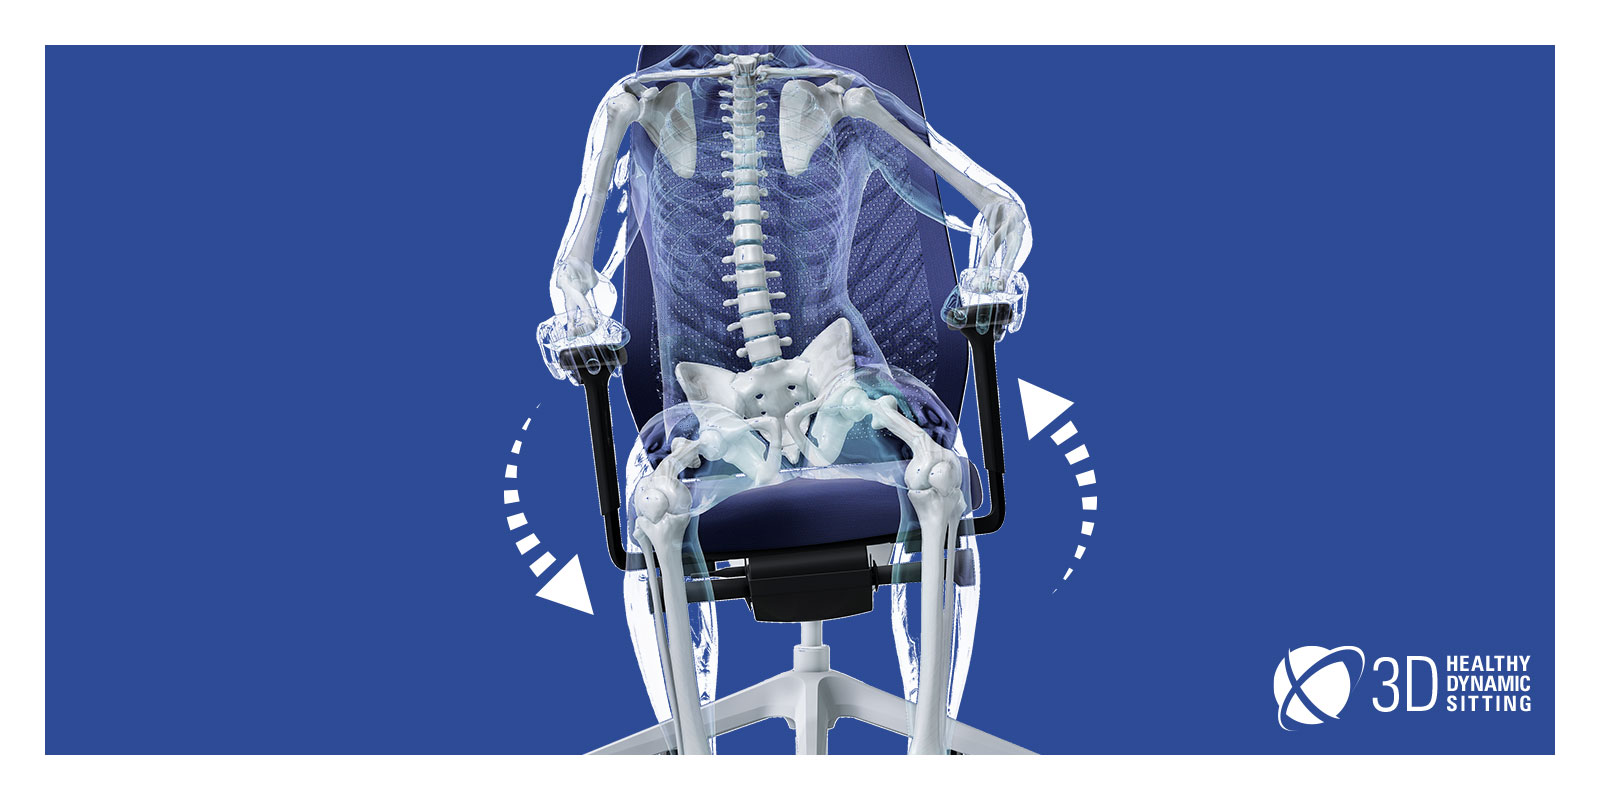 A transparent figure, whose skeleton is visible, sitting on a JOYCE swivel chair with black mesh backrest, blue seat cover, black T-armrests and plastic parts (including base, column) as well as FlexTech in white. The transparent figure is shifting its weight to the right, causing the chair to adapt to its movements. Around the chair, two white arrows form a circle, indicating the mobility of the chair. This active sitting is promoted by the FlexTech function.